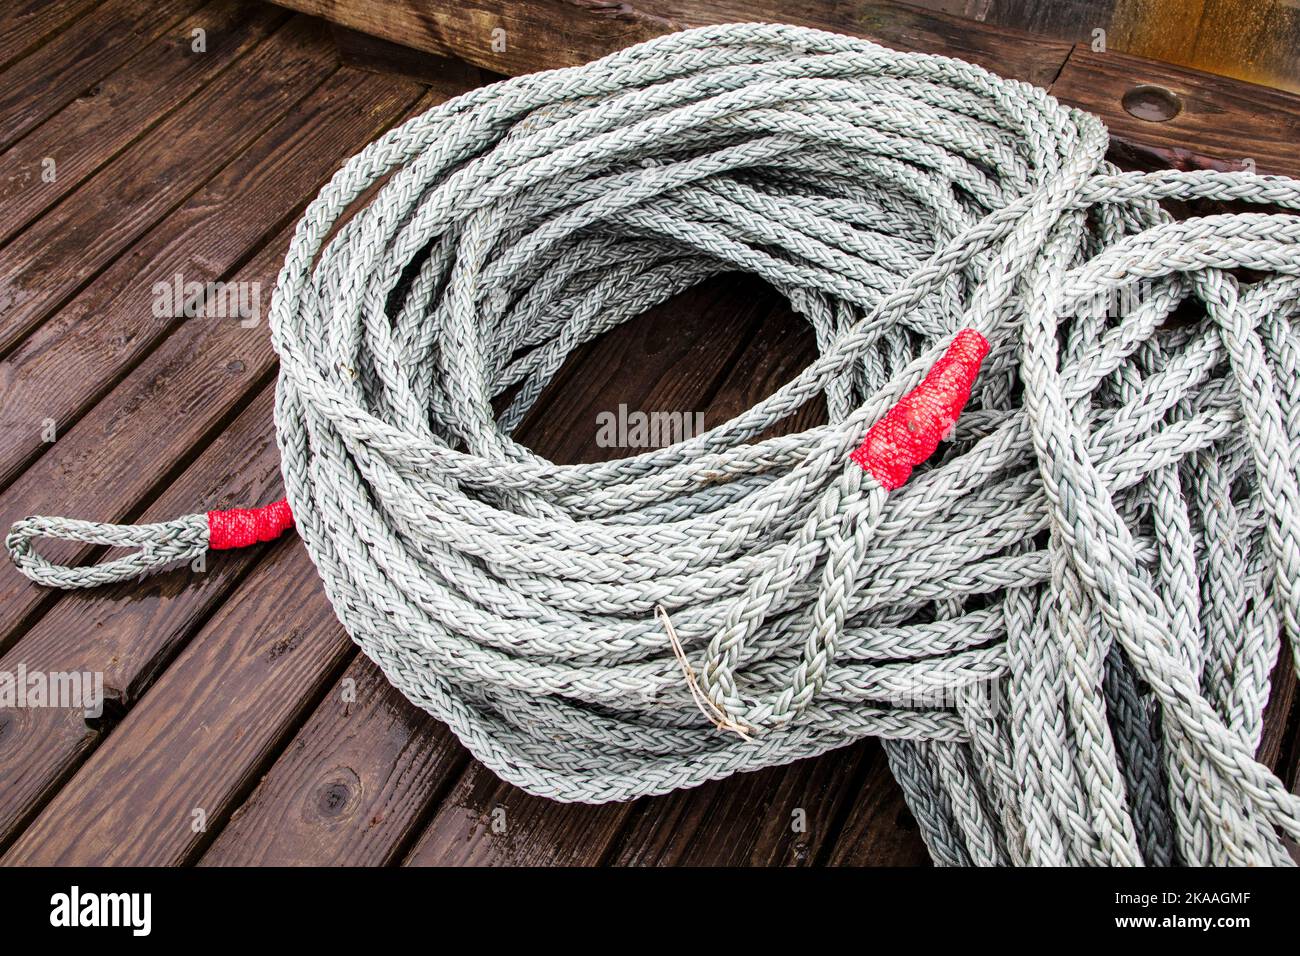 Colorful ropes and rigging. Charter and commercial fishing boats in the harbor, Kodiak, Alaska, USA. Stock Photo